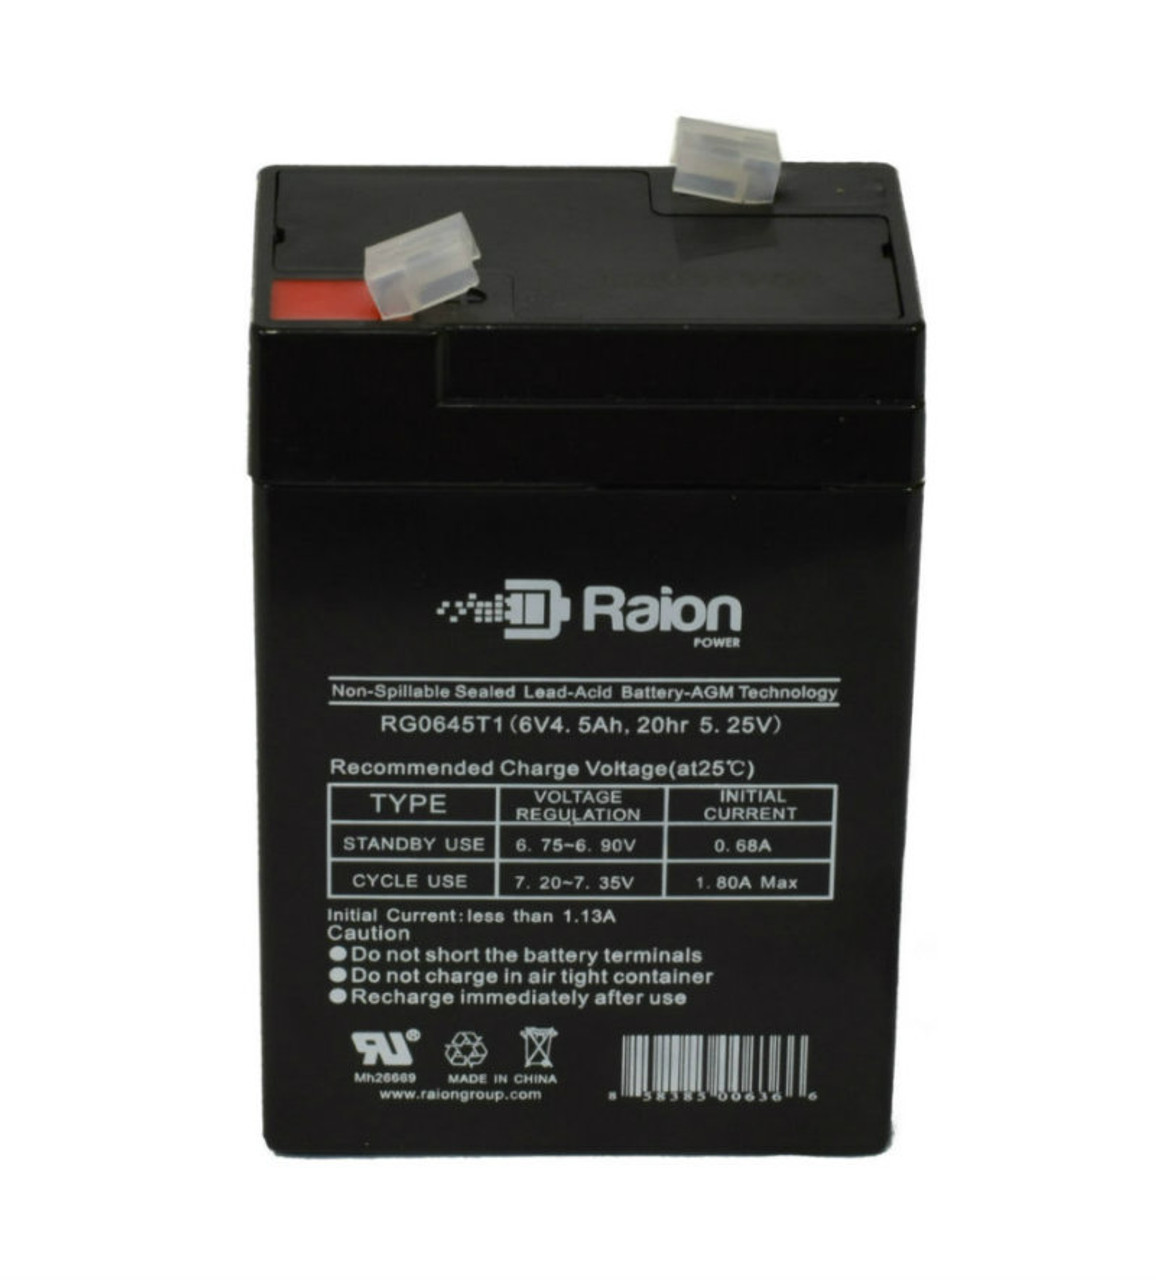 Raion Power RG0645T1 Replacement Battery Cartridge for Teledyne WINDSOR